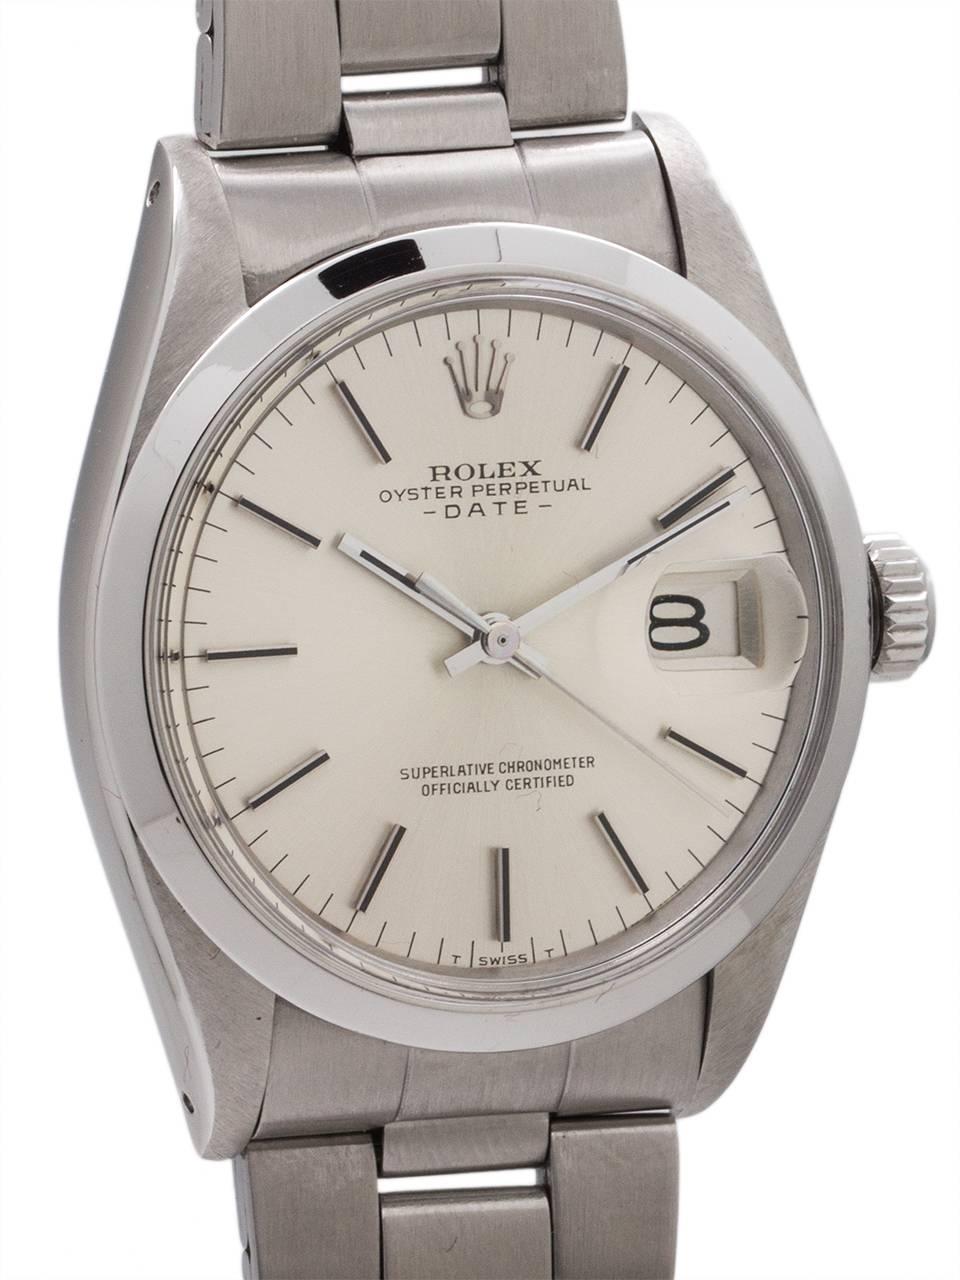 
Rolex stainless steel Oyster Perpetual Date ref 1500 serial# 2.7 million circa 1971. Featuring a 34mm diameter case with smooth bezel, acrylic crystal, and very pleasing condition original silvered satin dial with applied silver indexes and silver